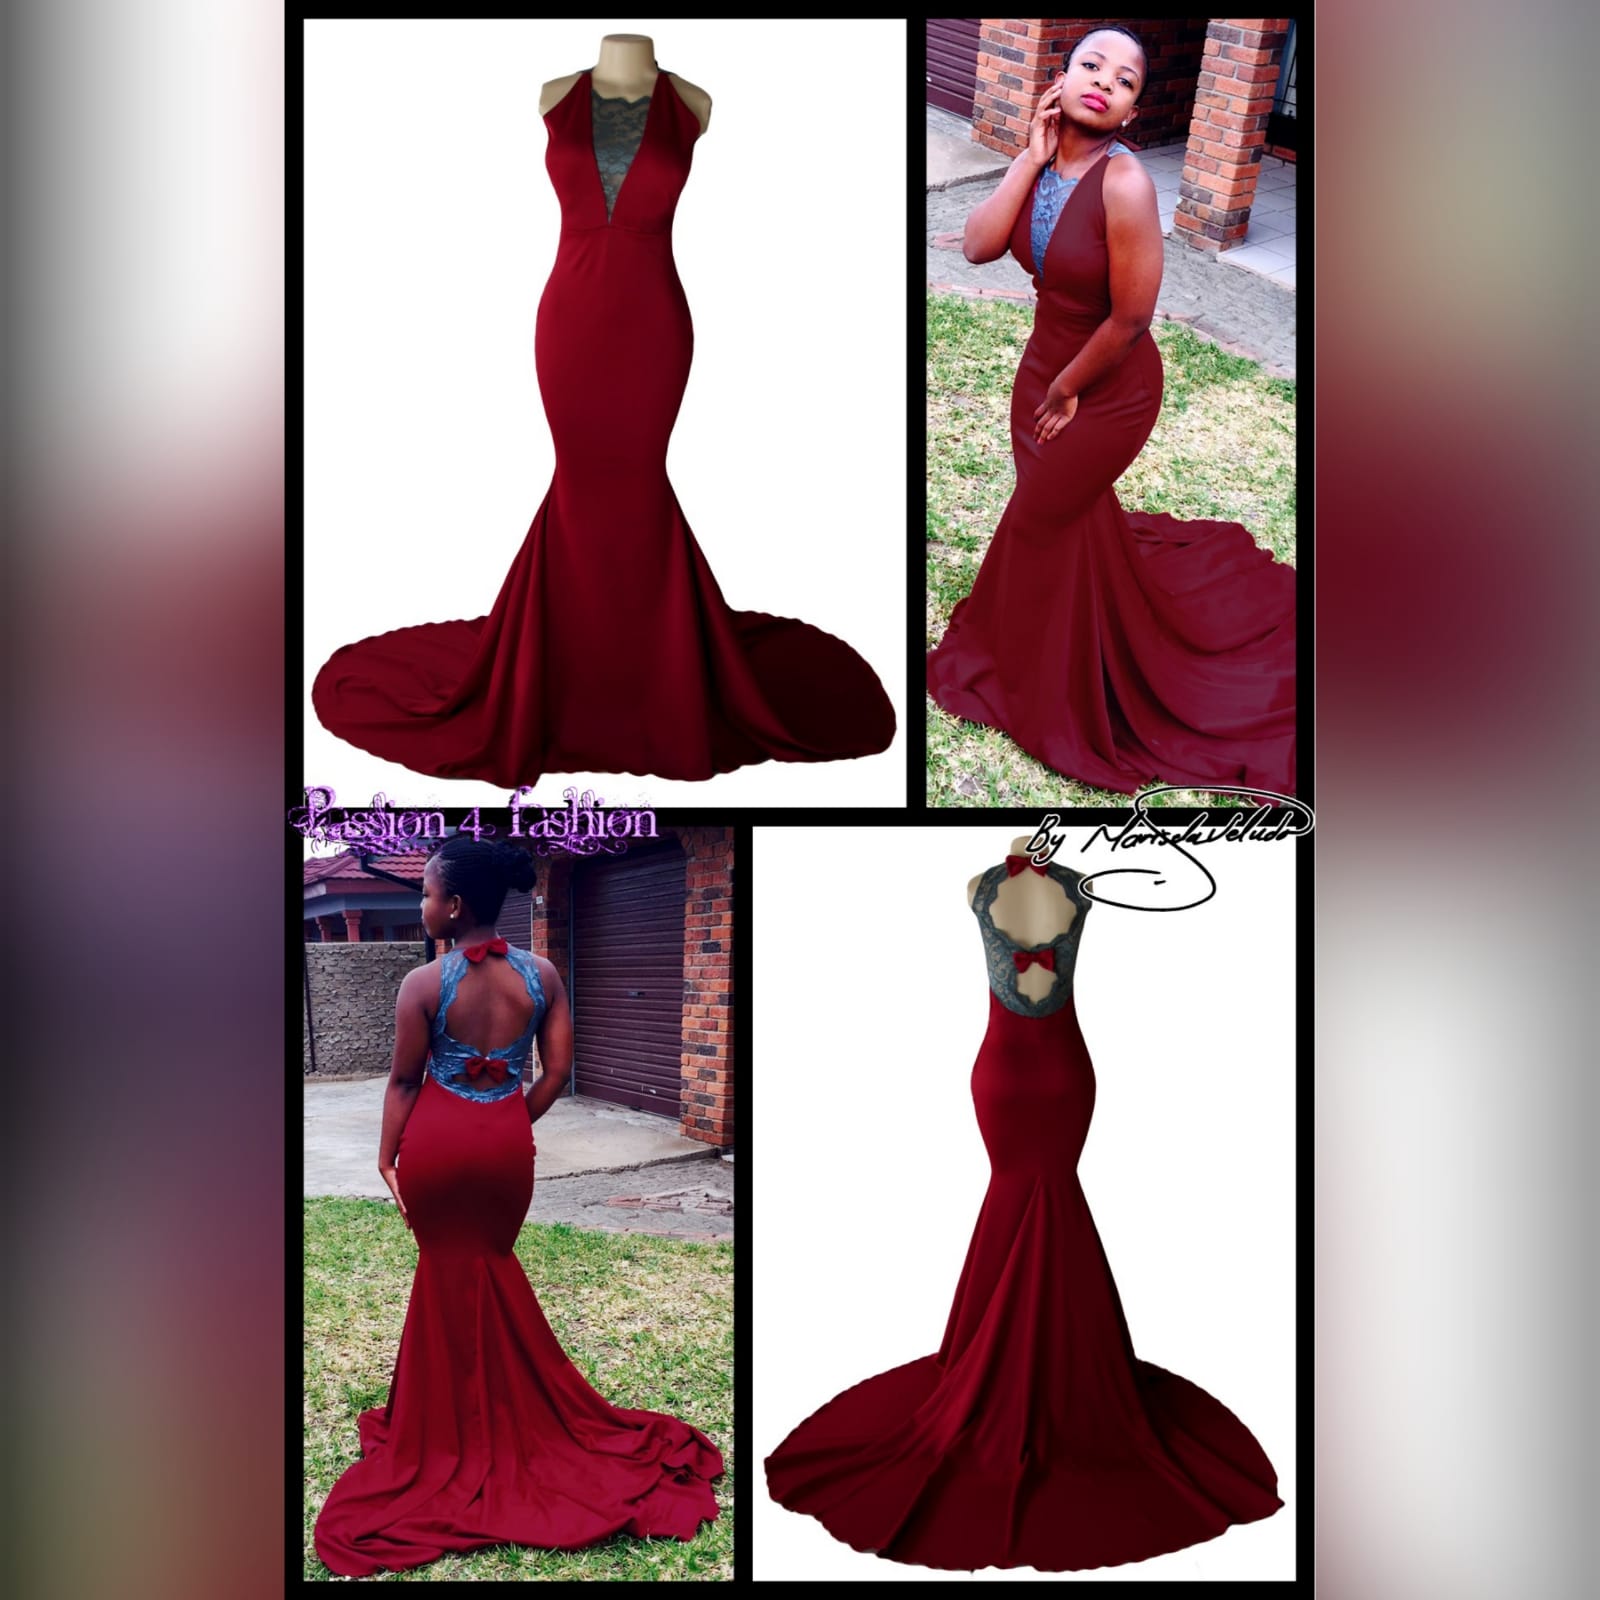 Maroon and gray soft mermaid prom dress with a train 3 maroon and gray soft mermaid prom dress with a train. Neckline and back in gray lace. Back detailed with bows